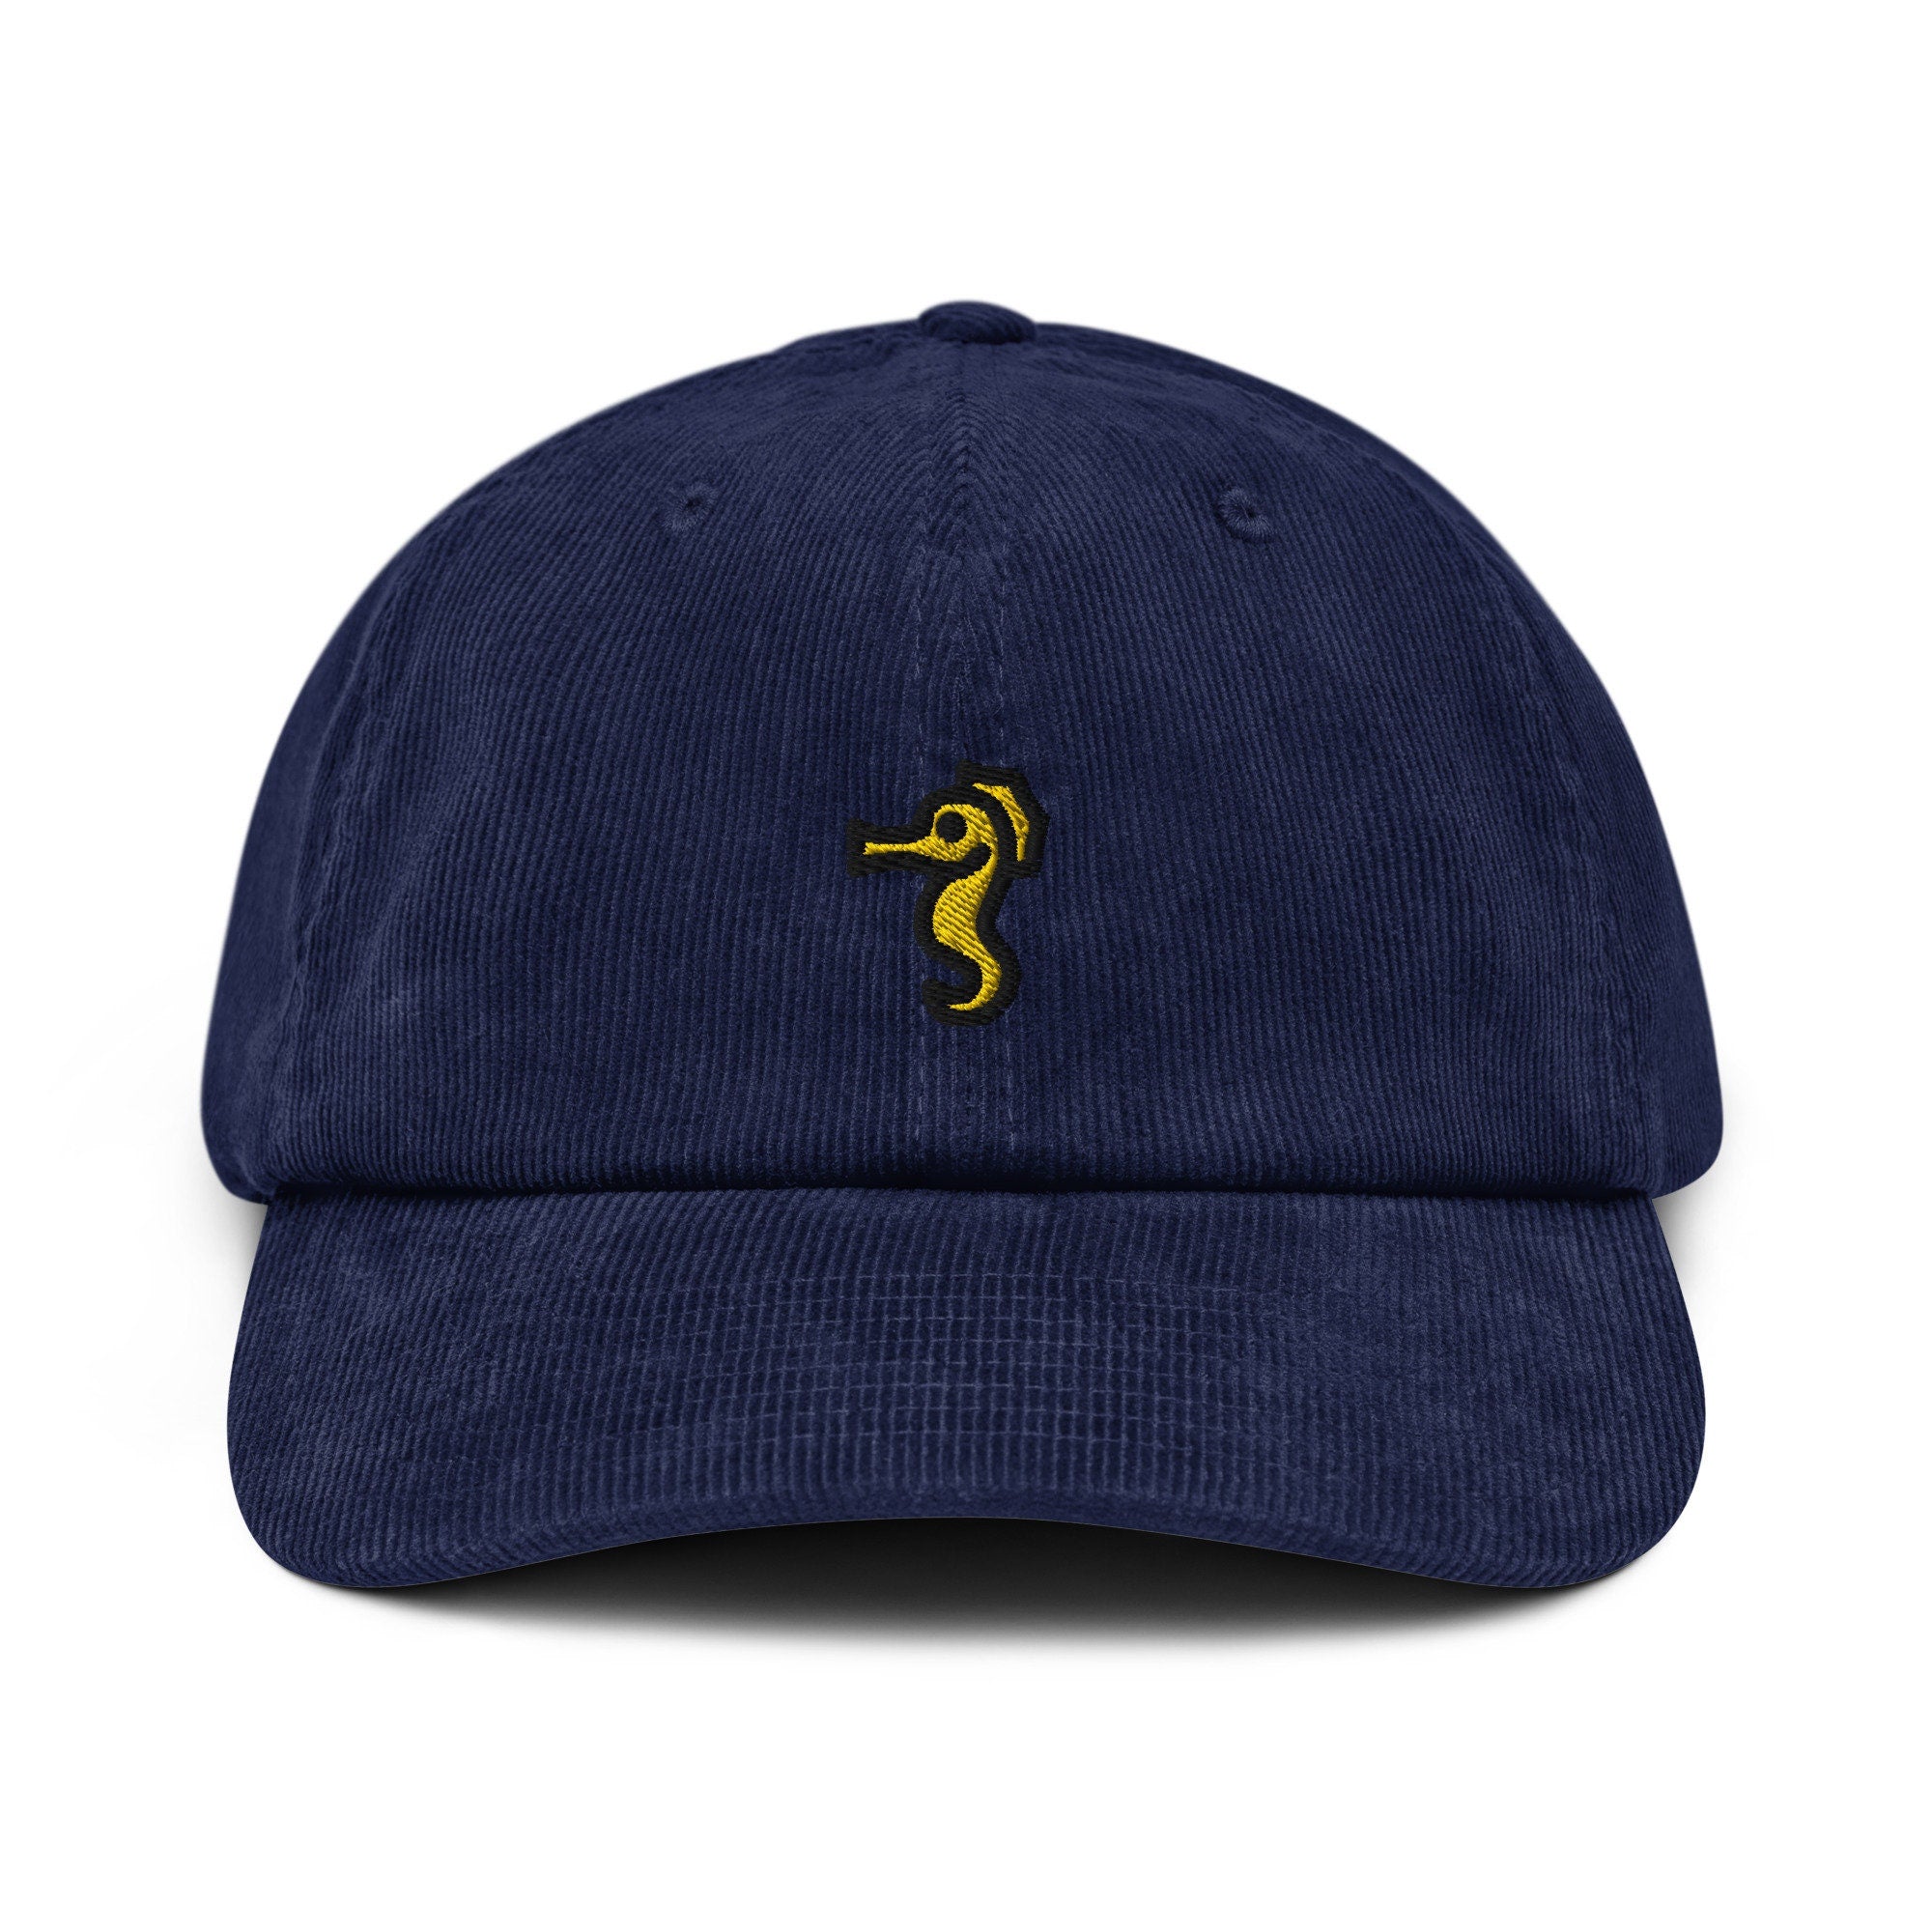 Seahorse Corduroy Hat, Handmade Embroidered Corduroy Dad Cap - Multiple Colors